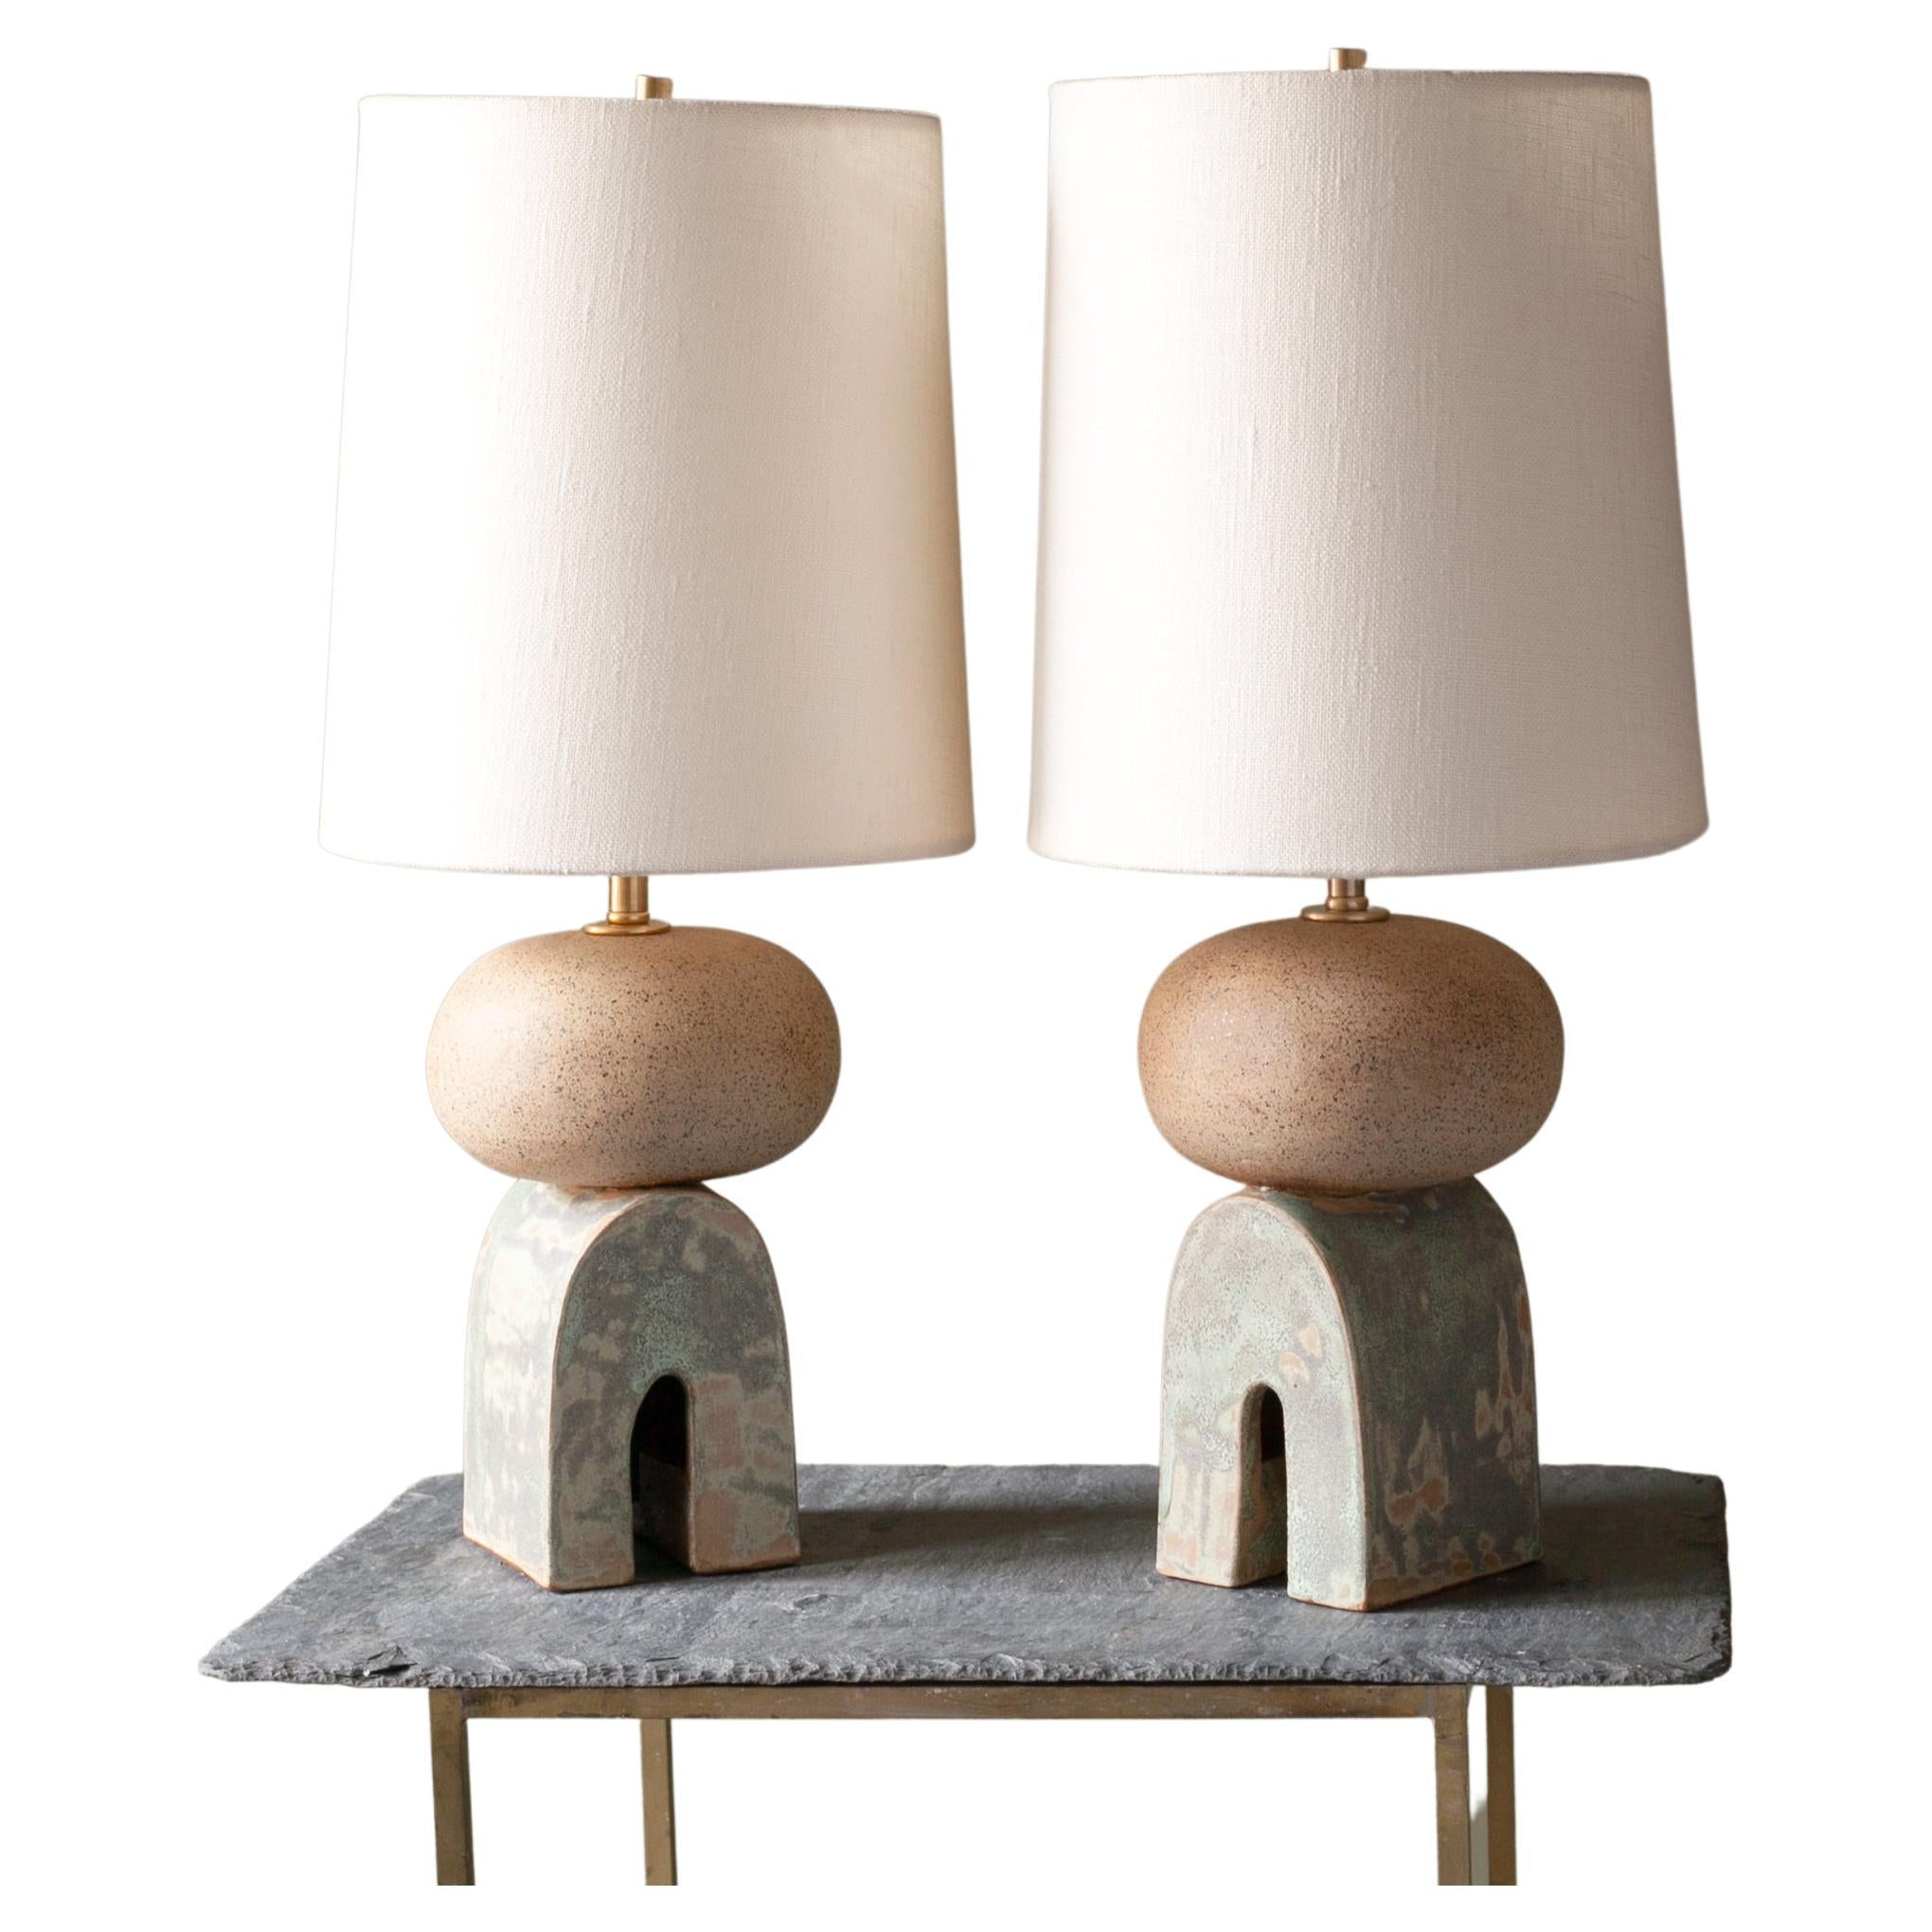 Pair of Handmade Ceramic Mini Devoe Small Table Lamps - white and green For Sale